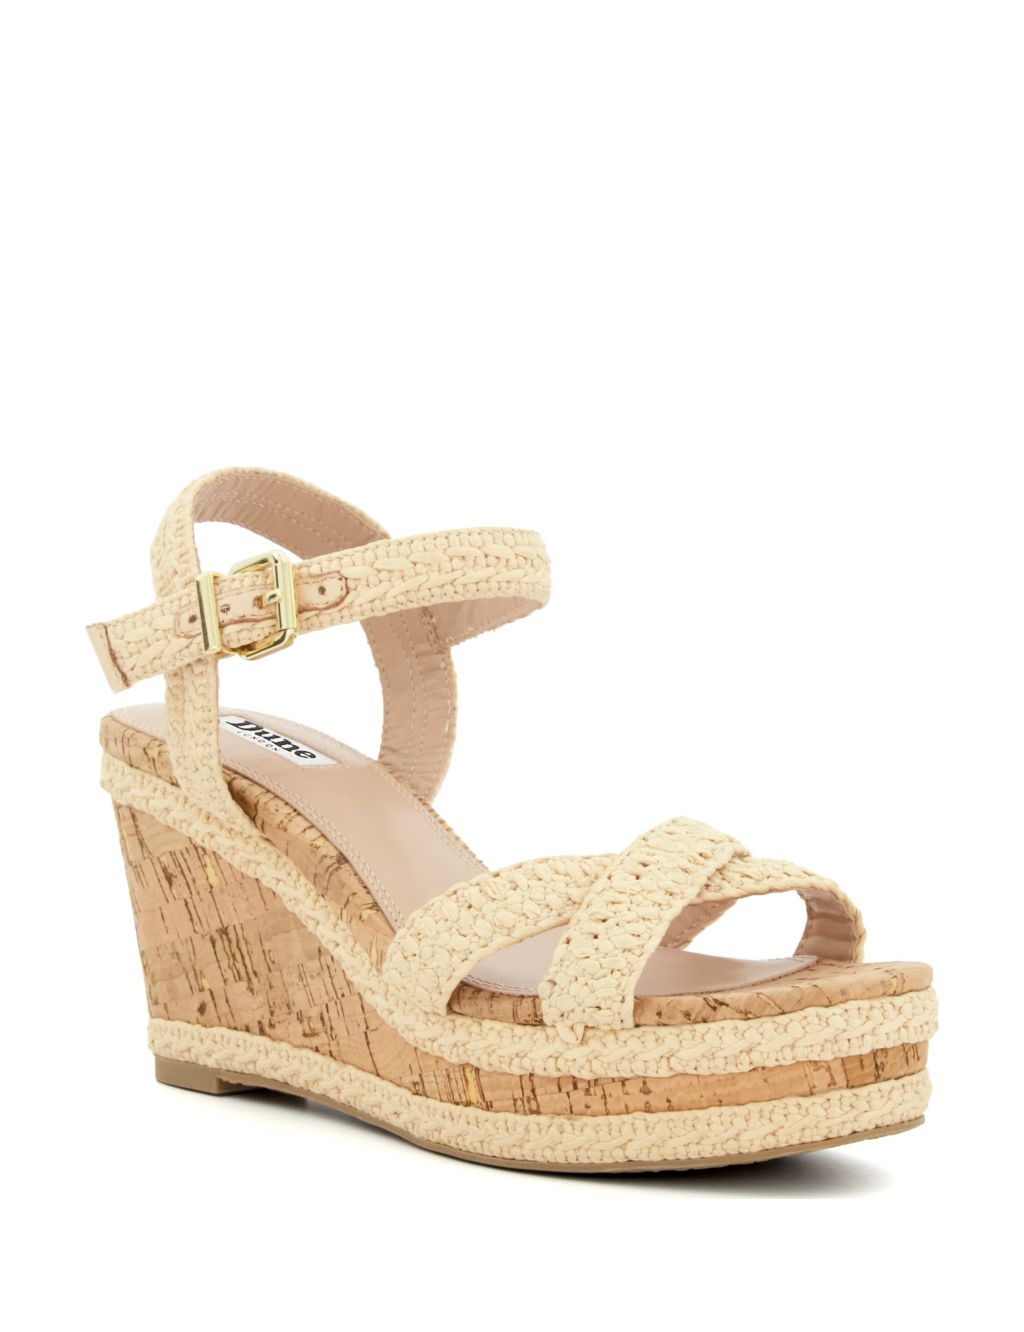 Woven Crossover Ankle Strap Wedge Sandals image 2